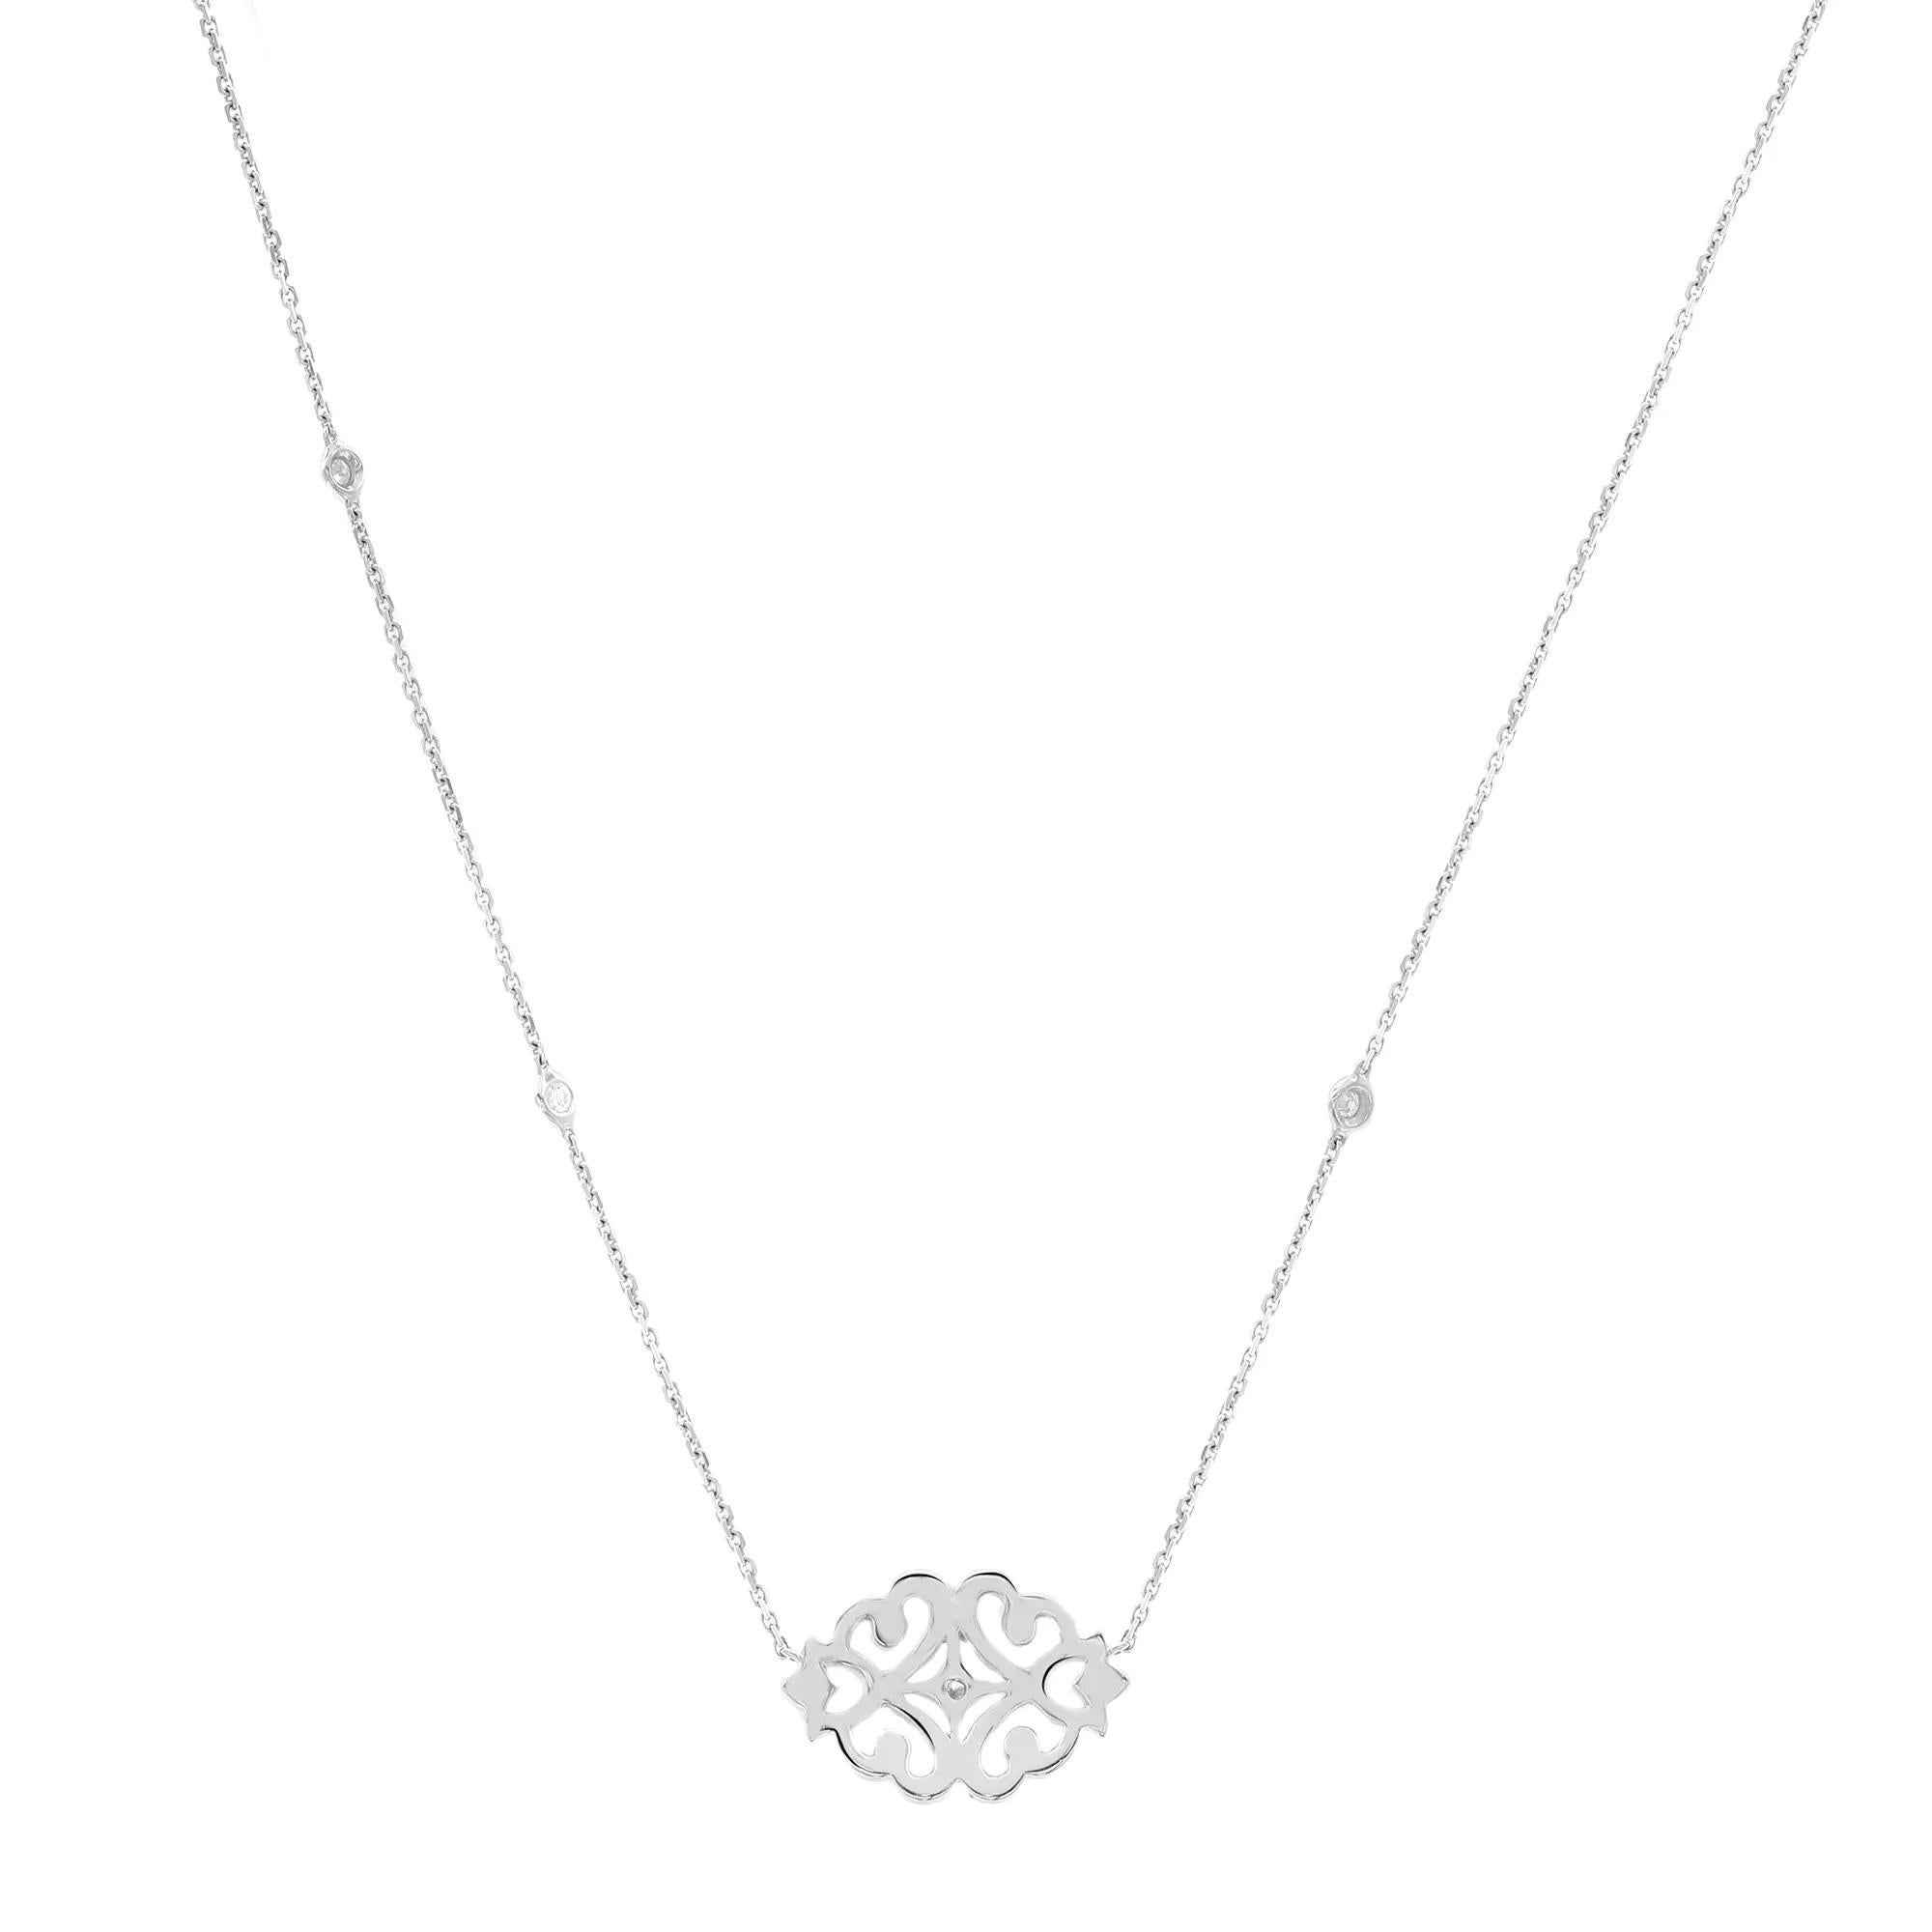 Embrace the beautiful Messika Sultane diamond pendant chain necklace. Perfect accent for every day and evening looks. It features a center bezel set round brilliant cut diamond with pave set round cut diamonds weighing 0.38 carat. Crafted in